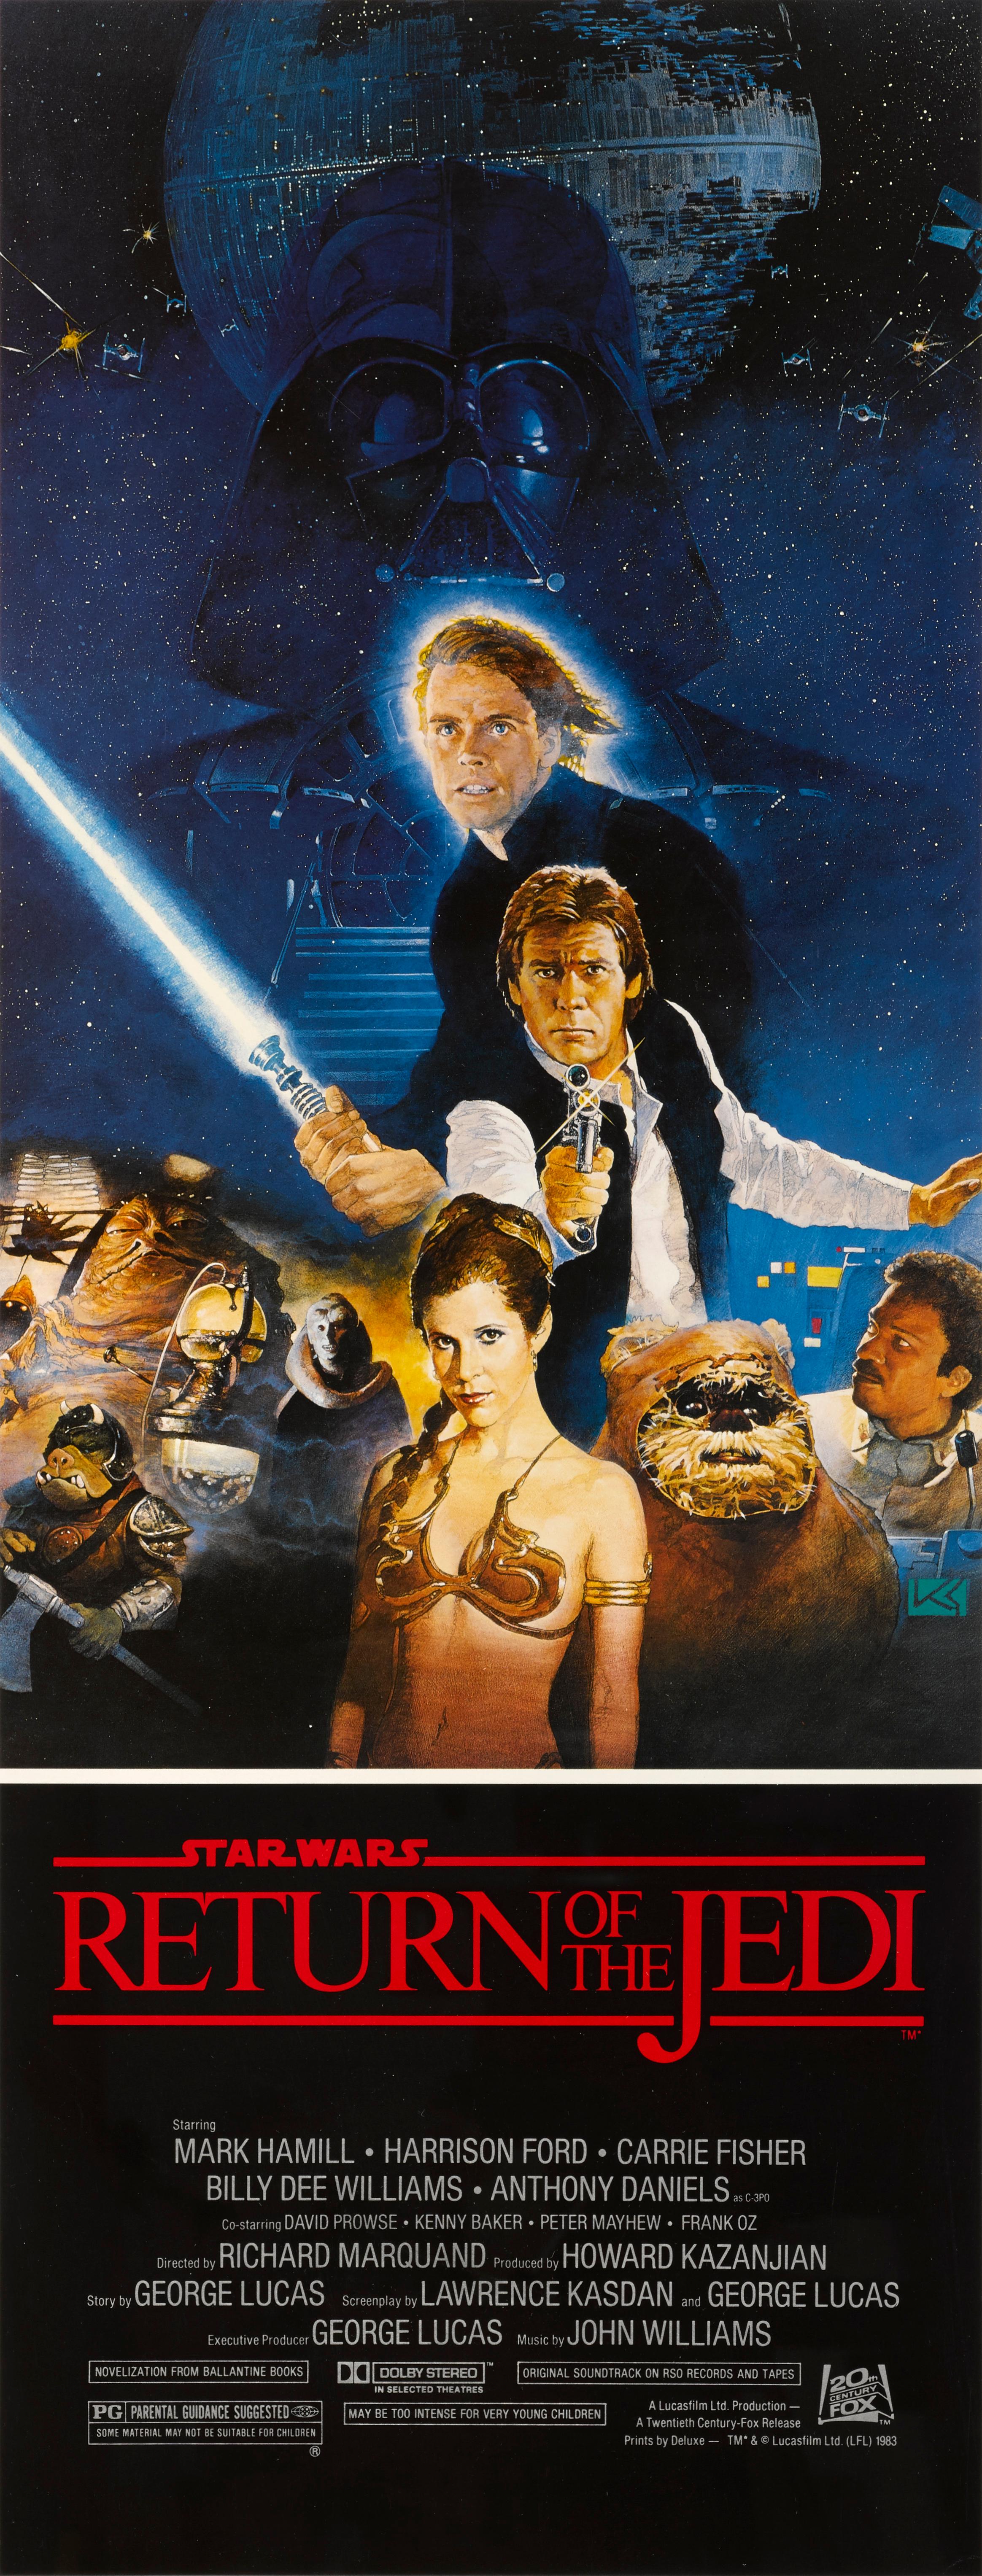 Original US style B film poster for the 1983 Third Star Wars film. Staring Mark Hamill, Harrison Ford, Carrie Fisher. The Art work is by Sano (dates unknown) This in near mint condition unfolded and conservation paper backed. It would be shipped in